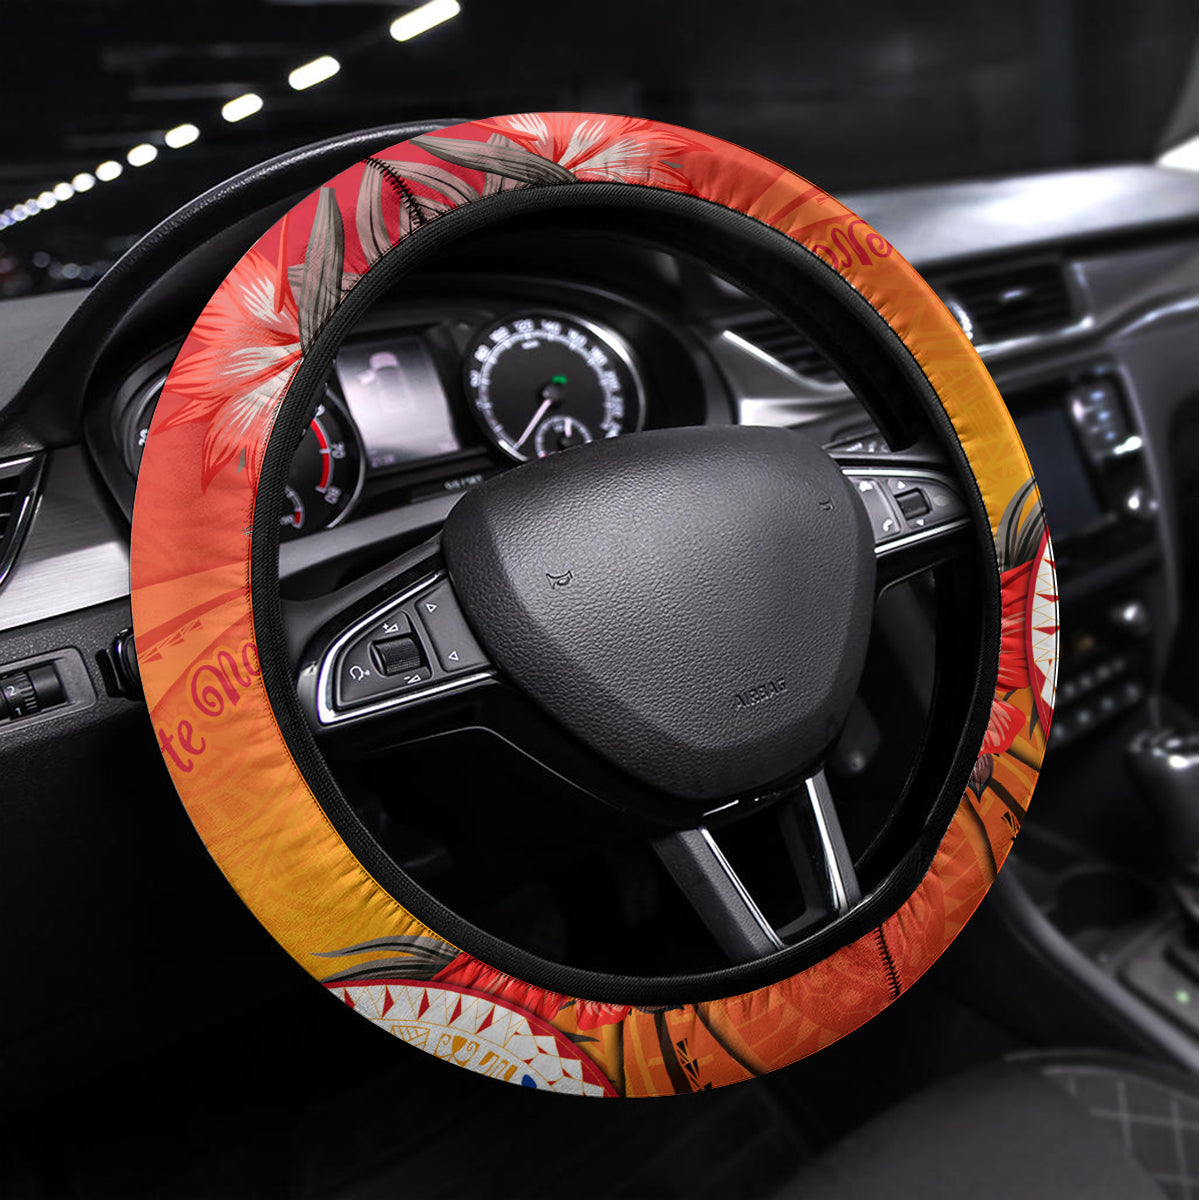 Personalised Wishes in Tahitian Christmas Steering Wheel Cover French Polynesia Santa Beach